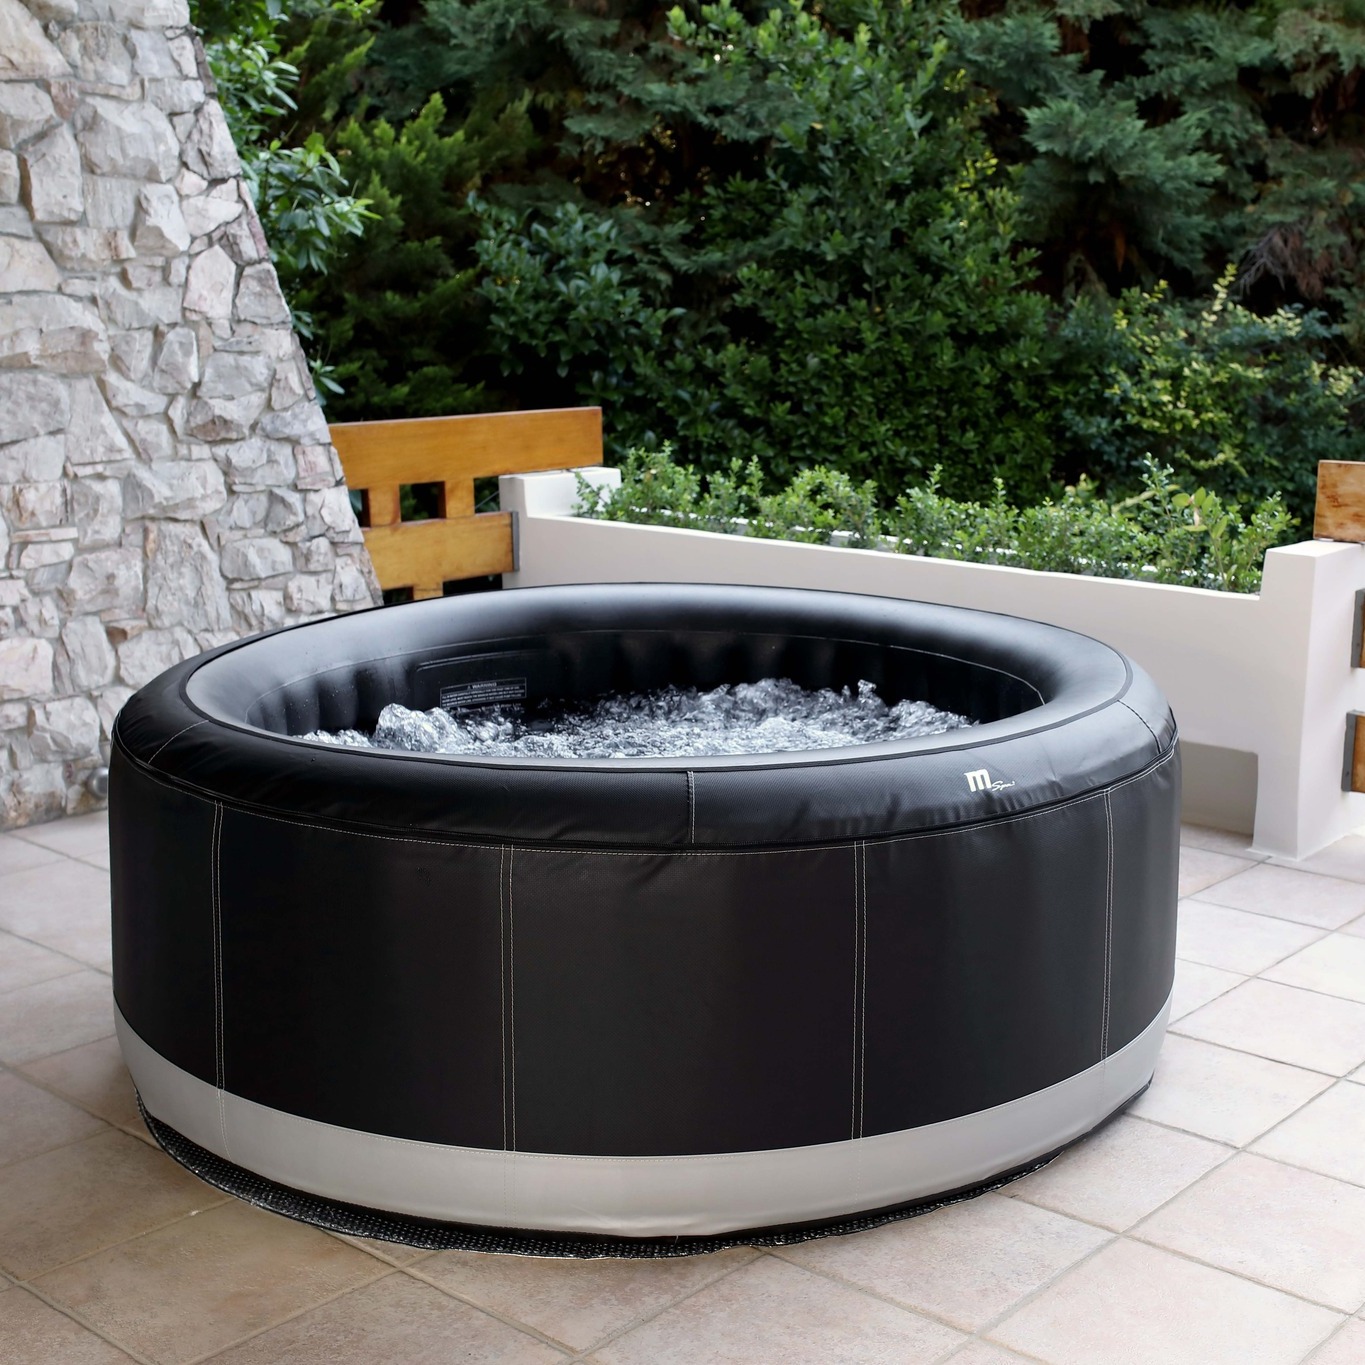 MSpa inflatable spas are high-quality, stylish and comfortable. Order yours now!  www.FavellsSpas.com » Outdoor Furniture Fuengirola, Costa Del Sol, Spain